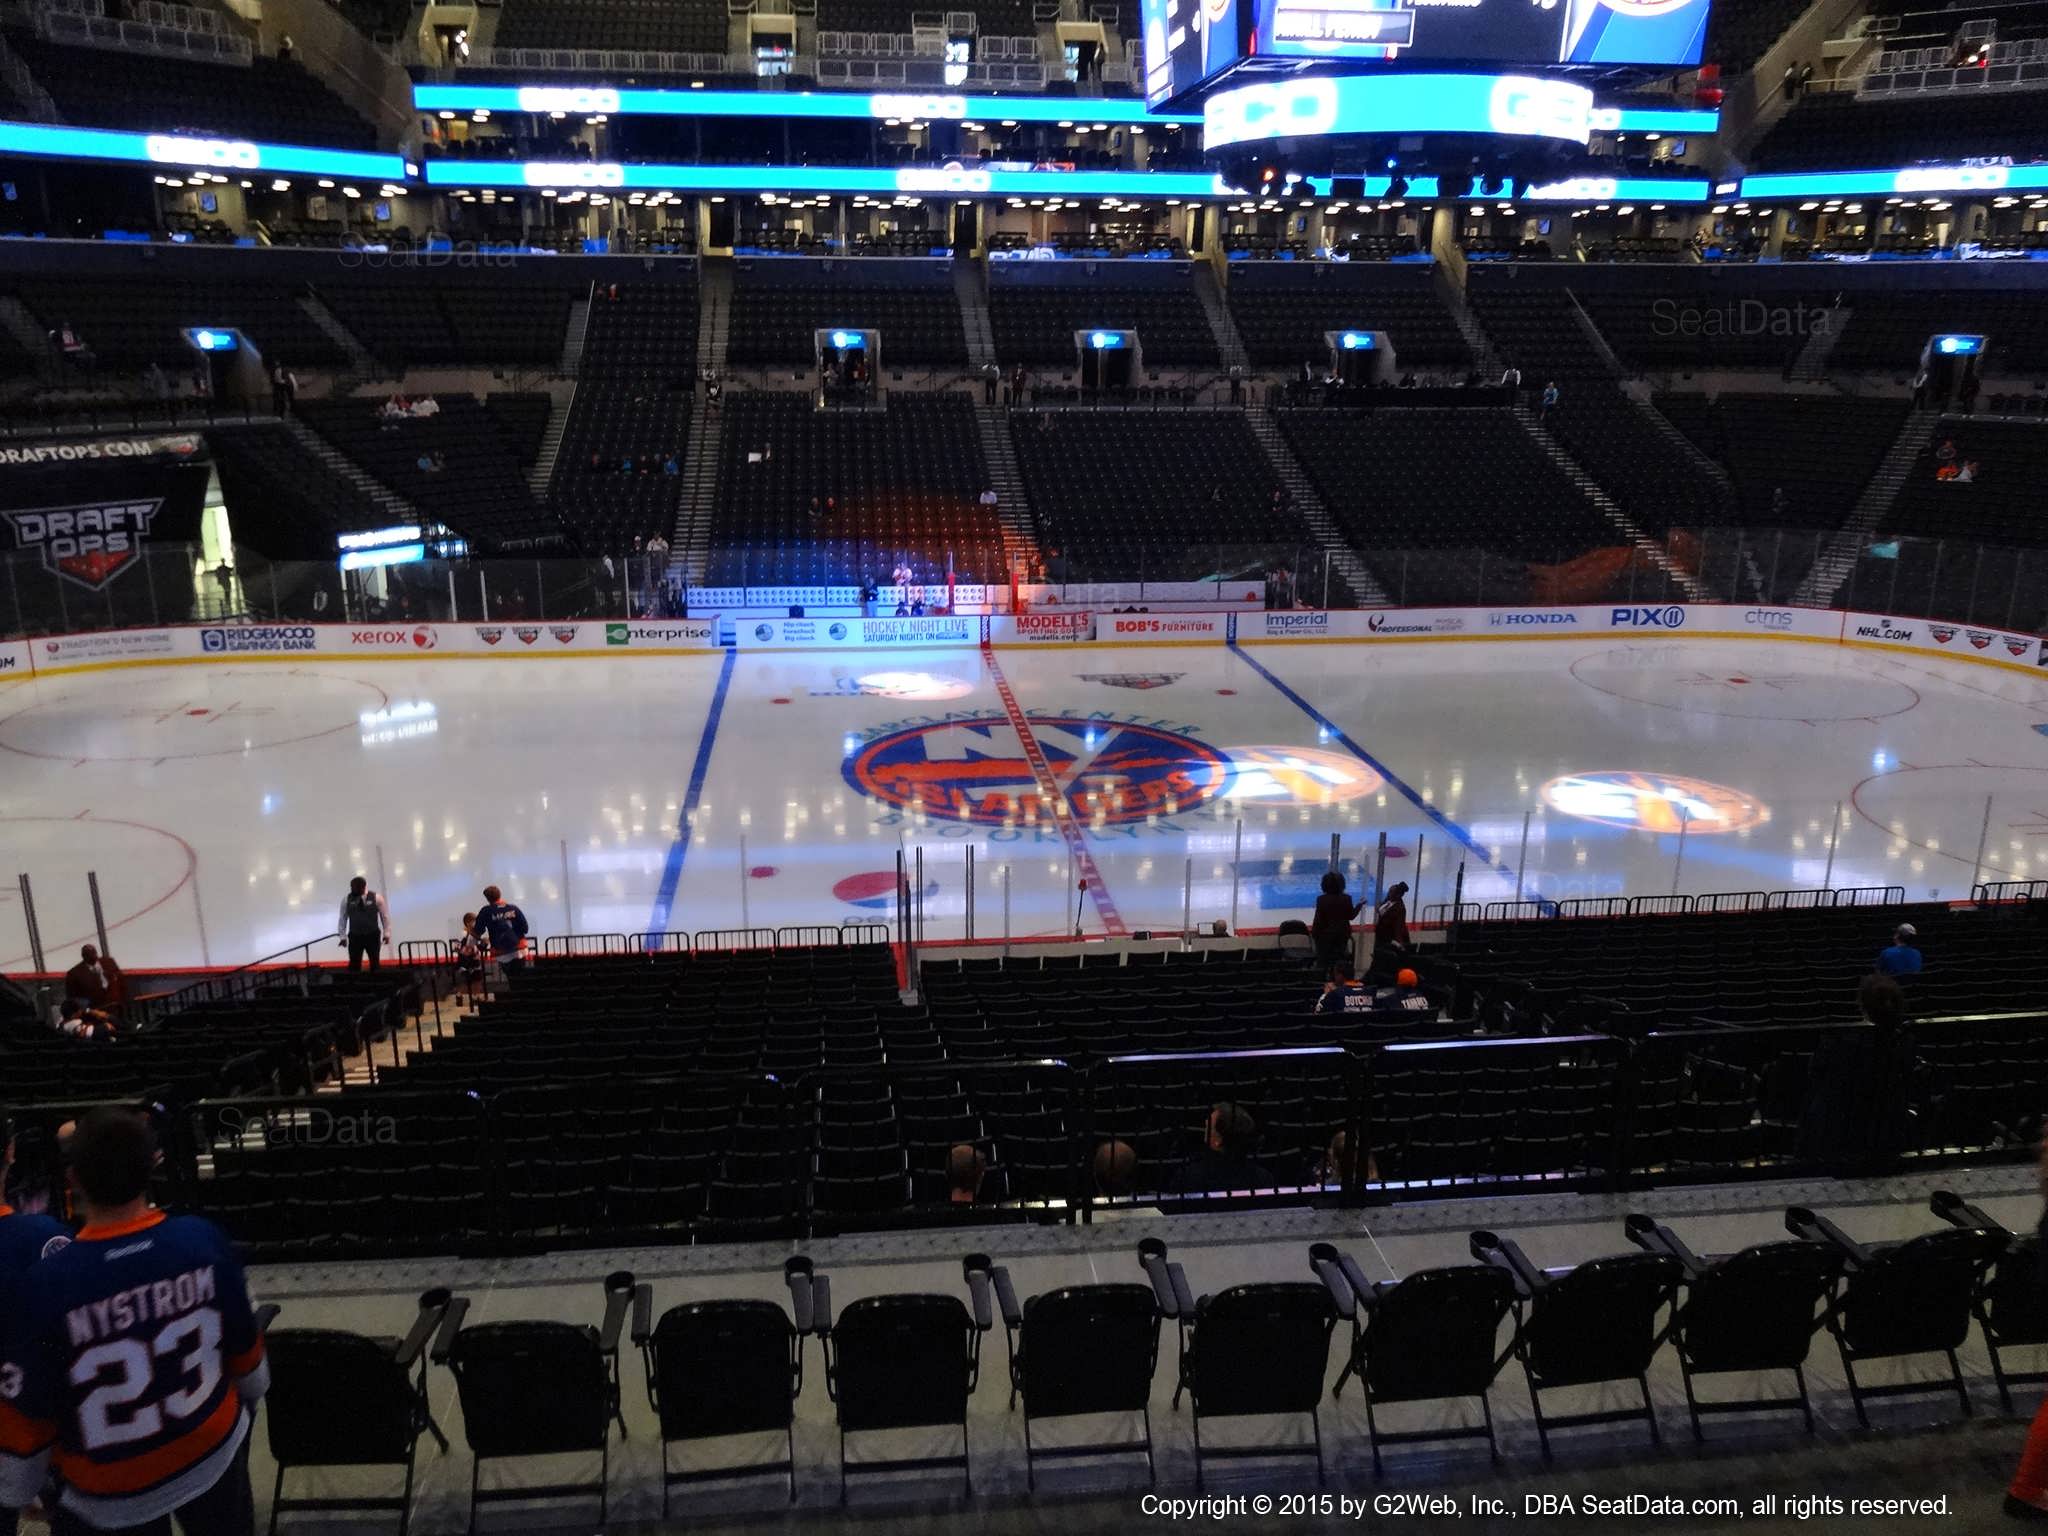 Seat View from Section 125 at the Barclays Center, home of the New York Islanders